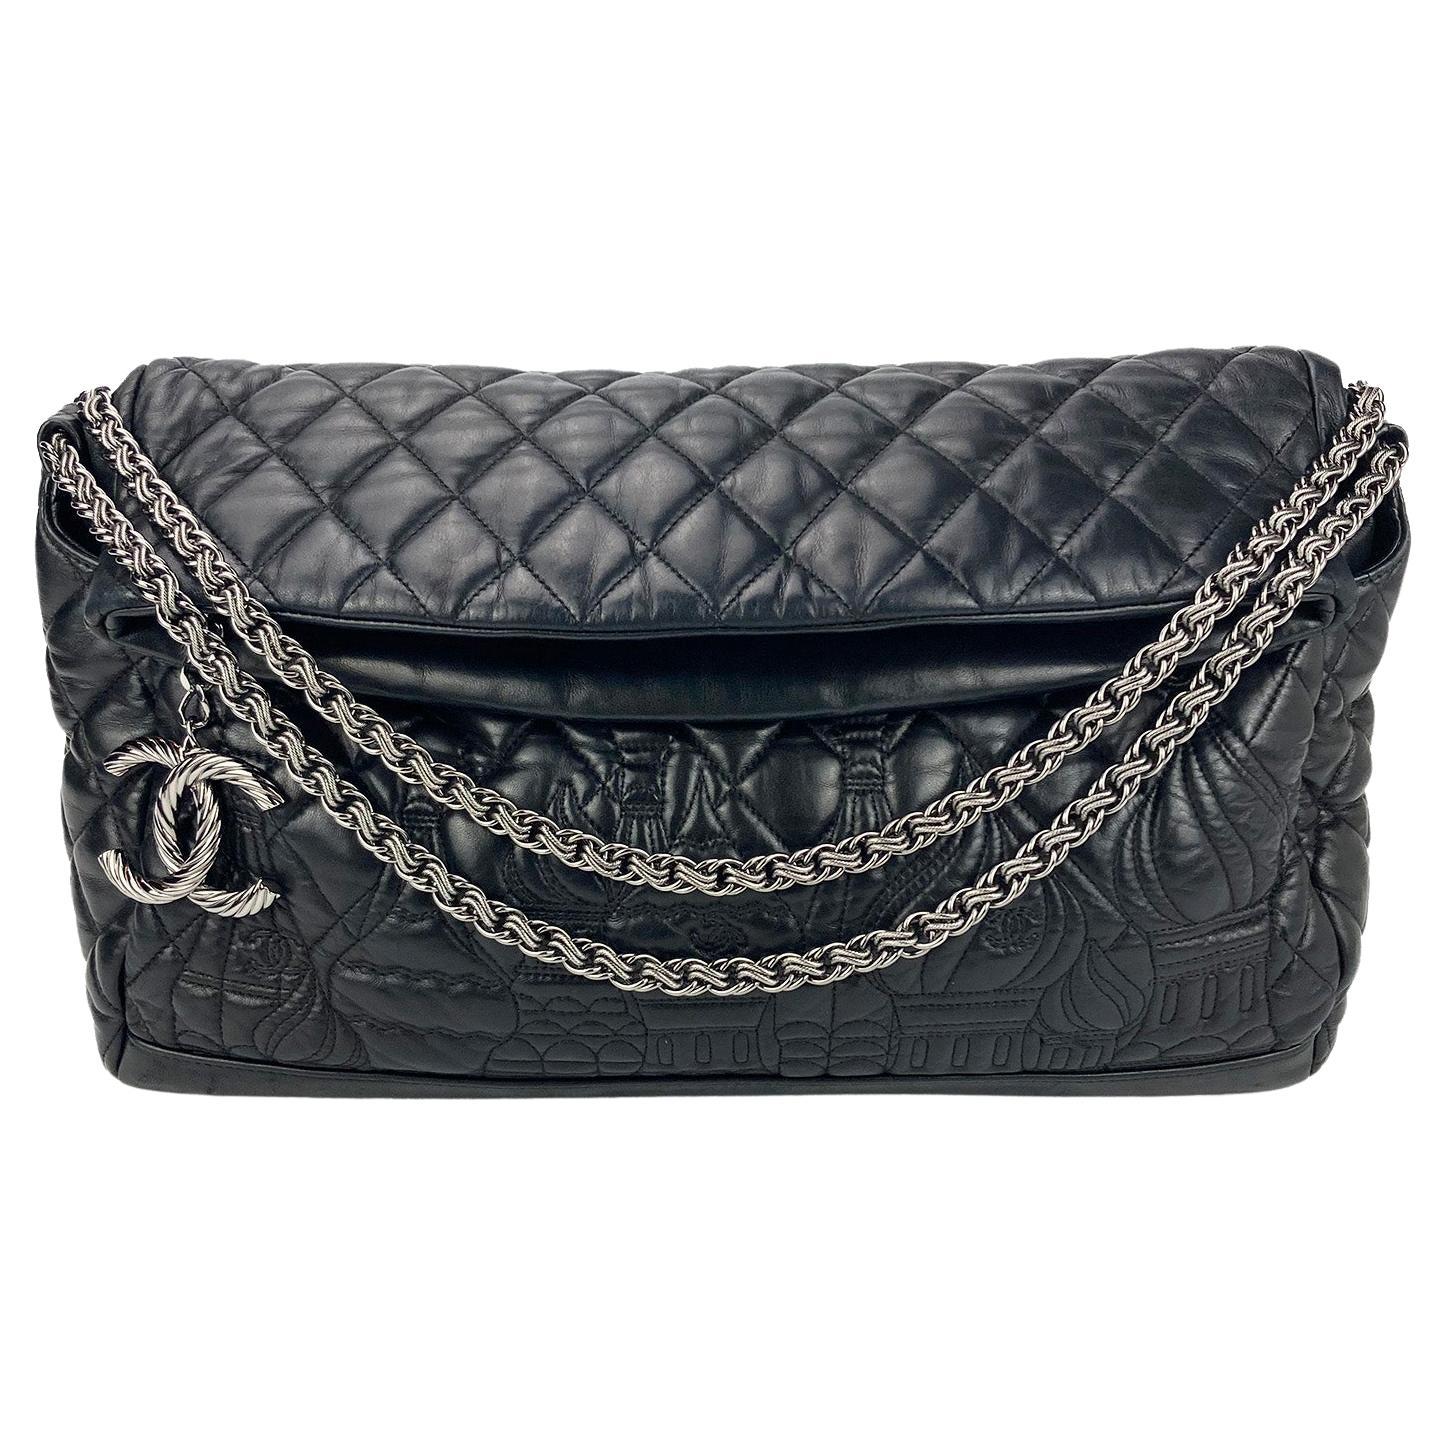 Chanel Black and White Large Deauville of Wool Felt with Silver Tone  Hardware  Handbags  Accessories Online  Ecommerce Retail  Sothebys